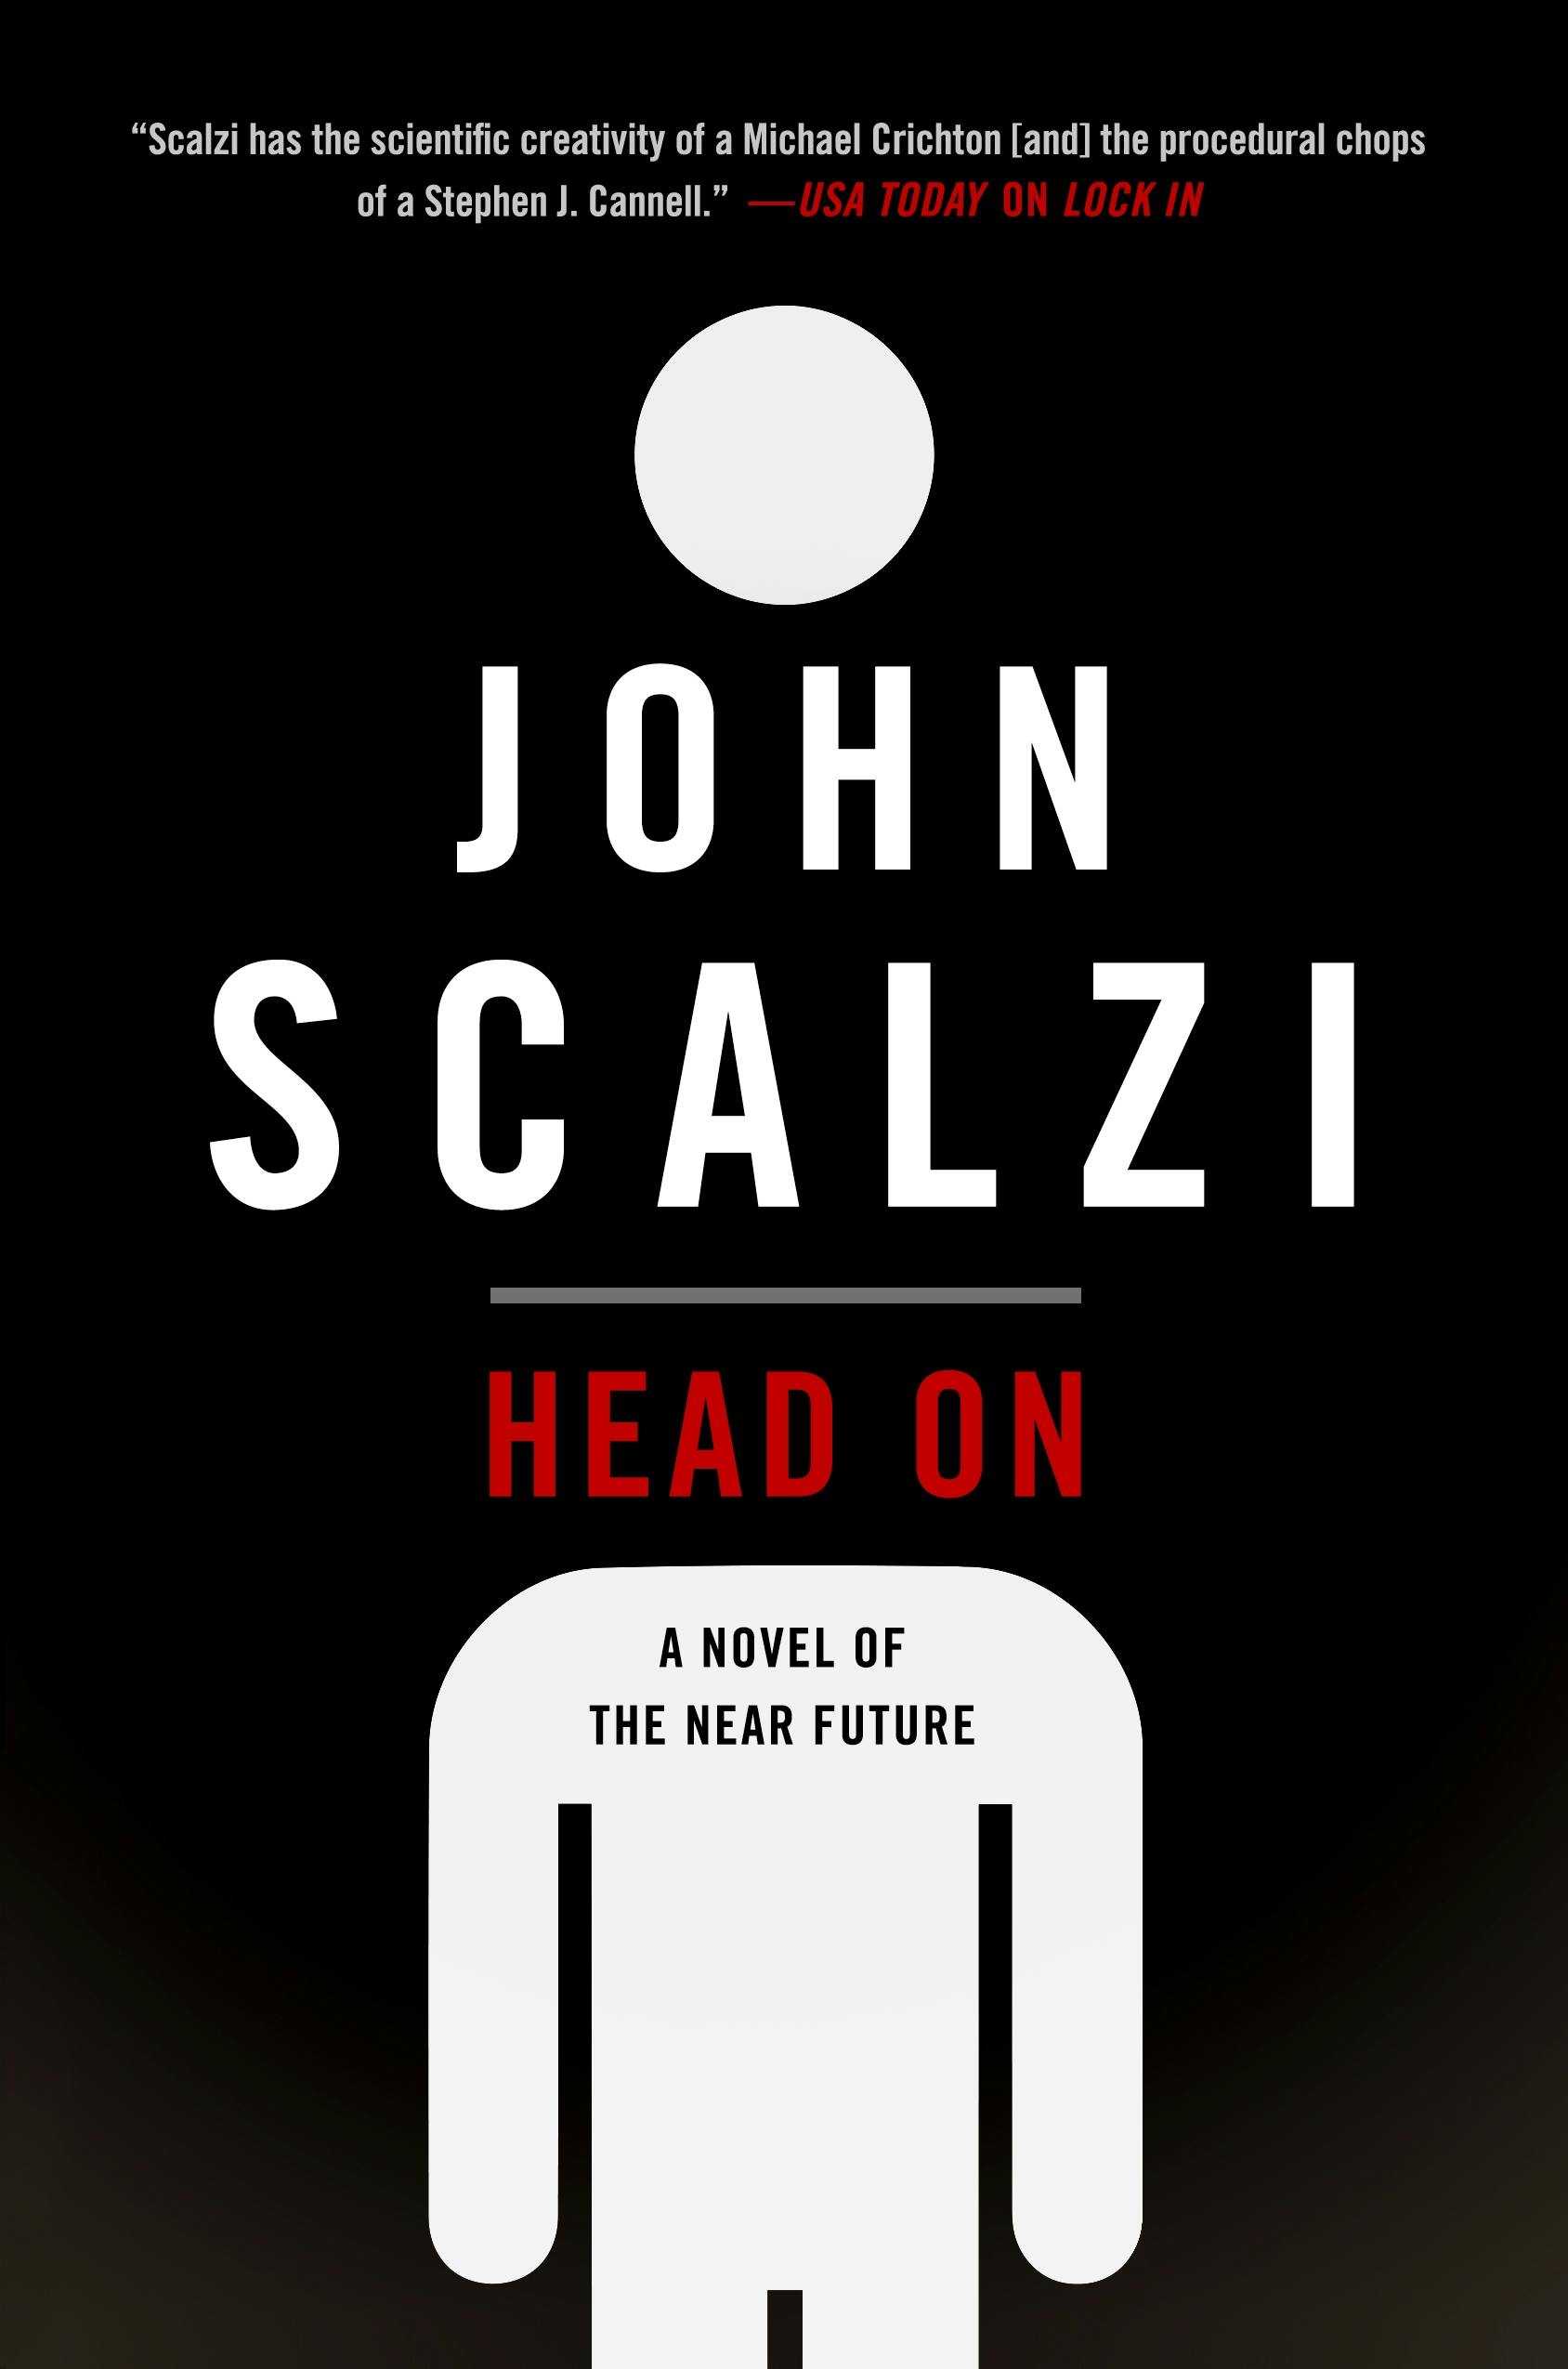 Cover for the book titled as: Head On